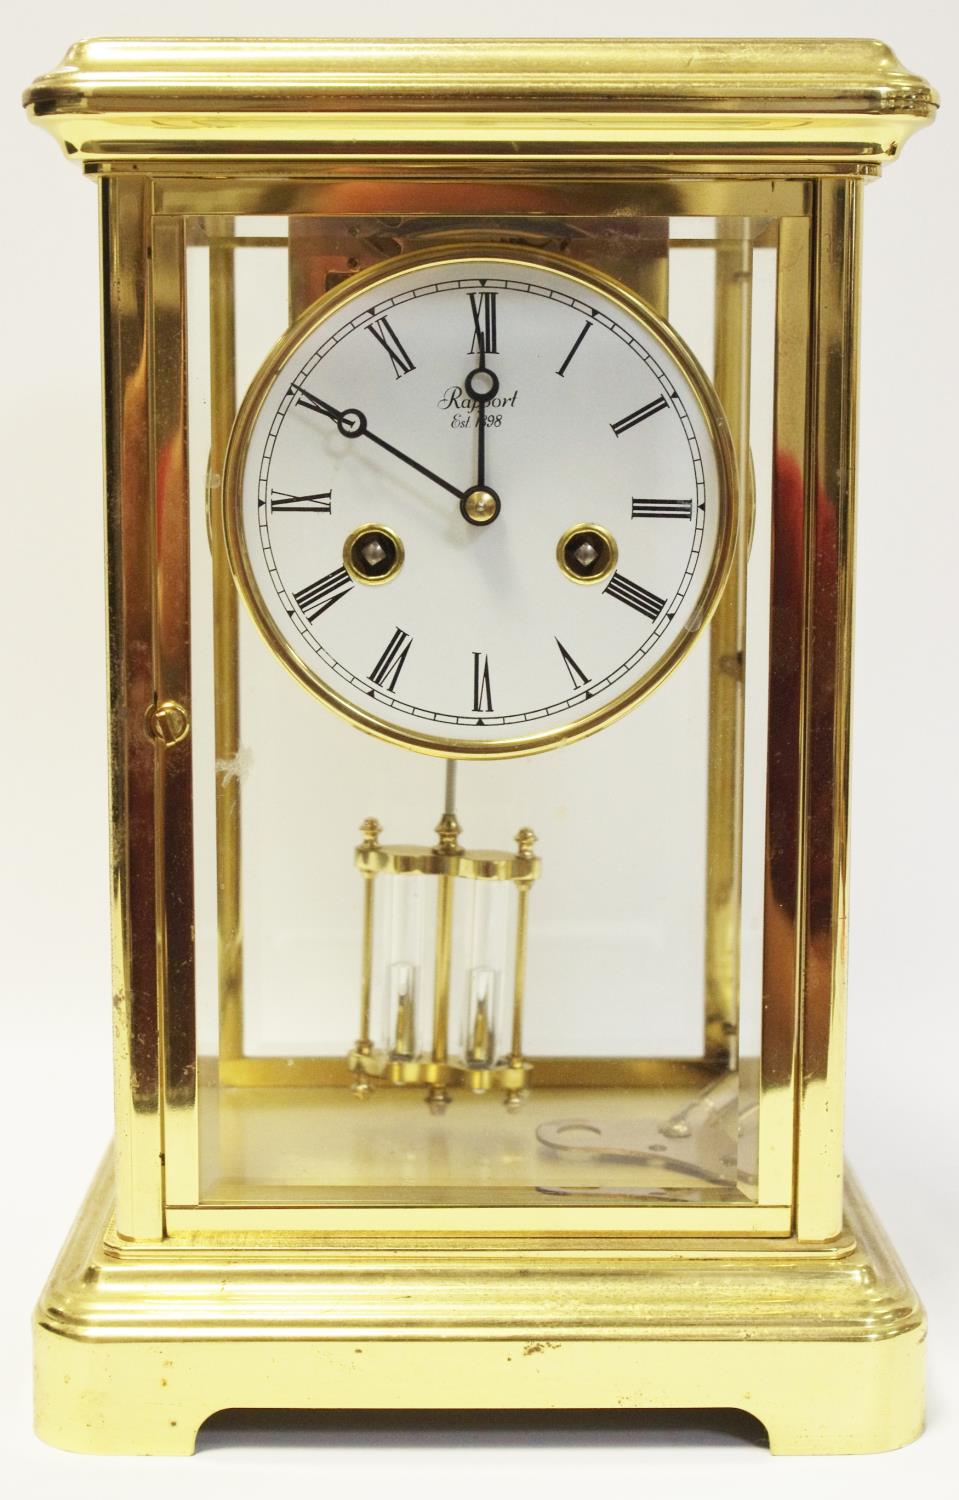 A 20th century brass mantel clock by Rapport, London, unsigned movement striking on a bell,